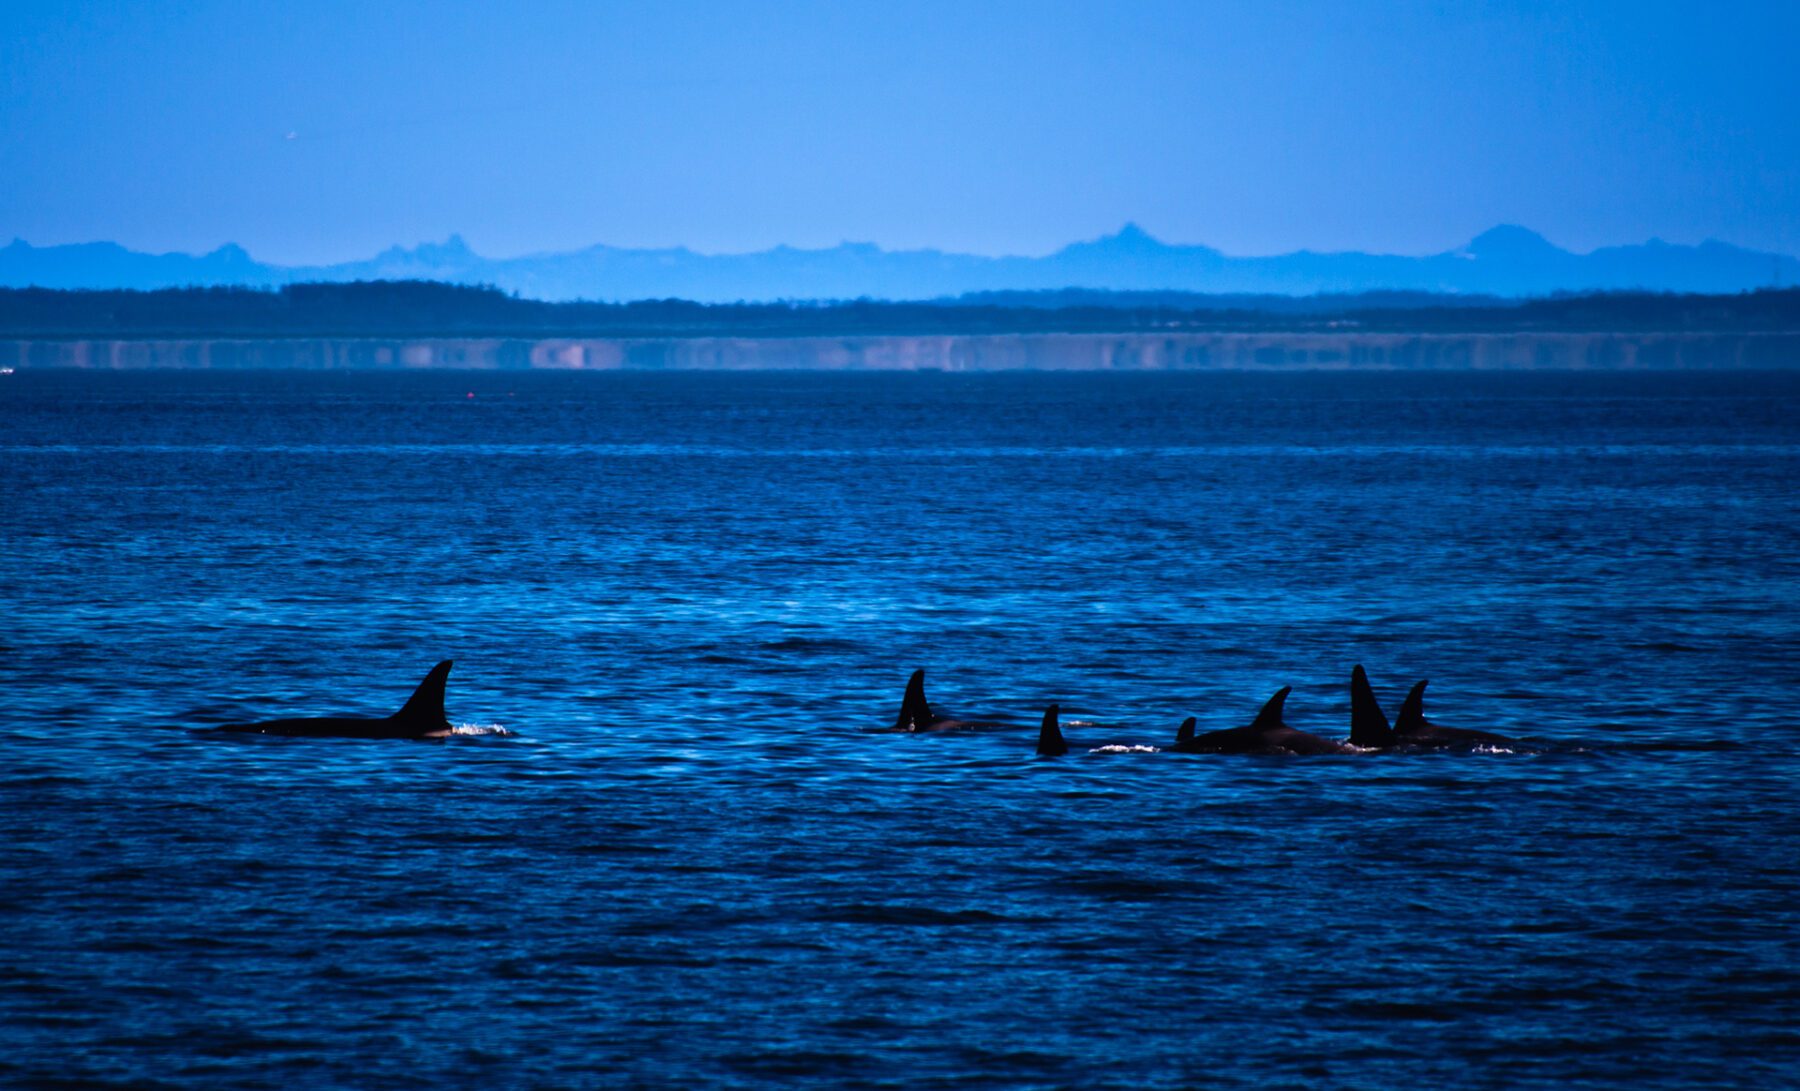 A group of orca whales in the ocean with mountains in the background, Washington.